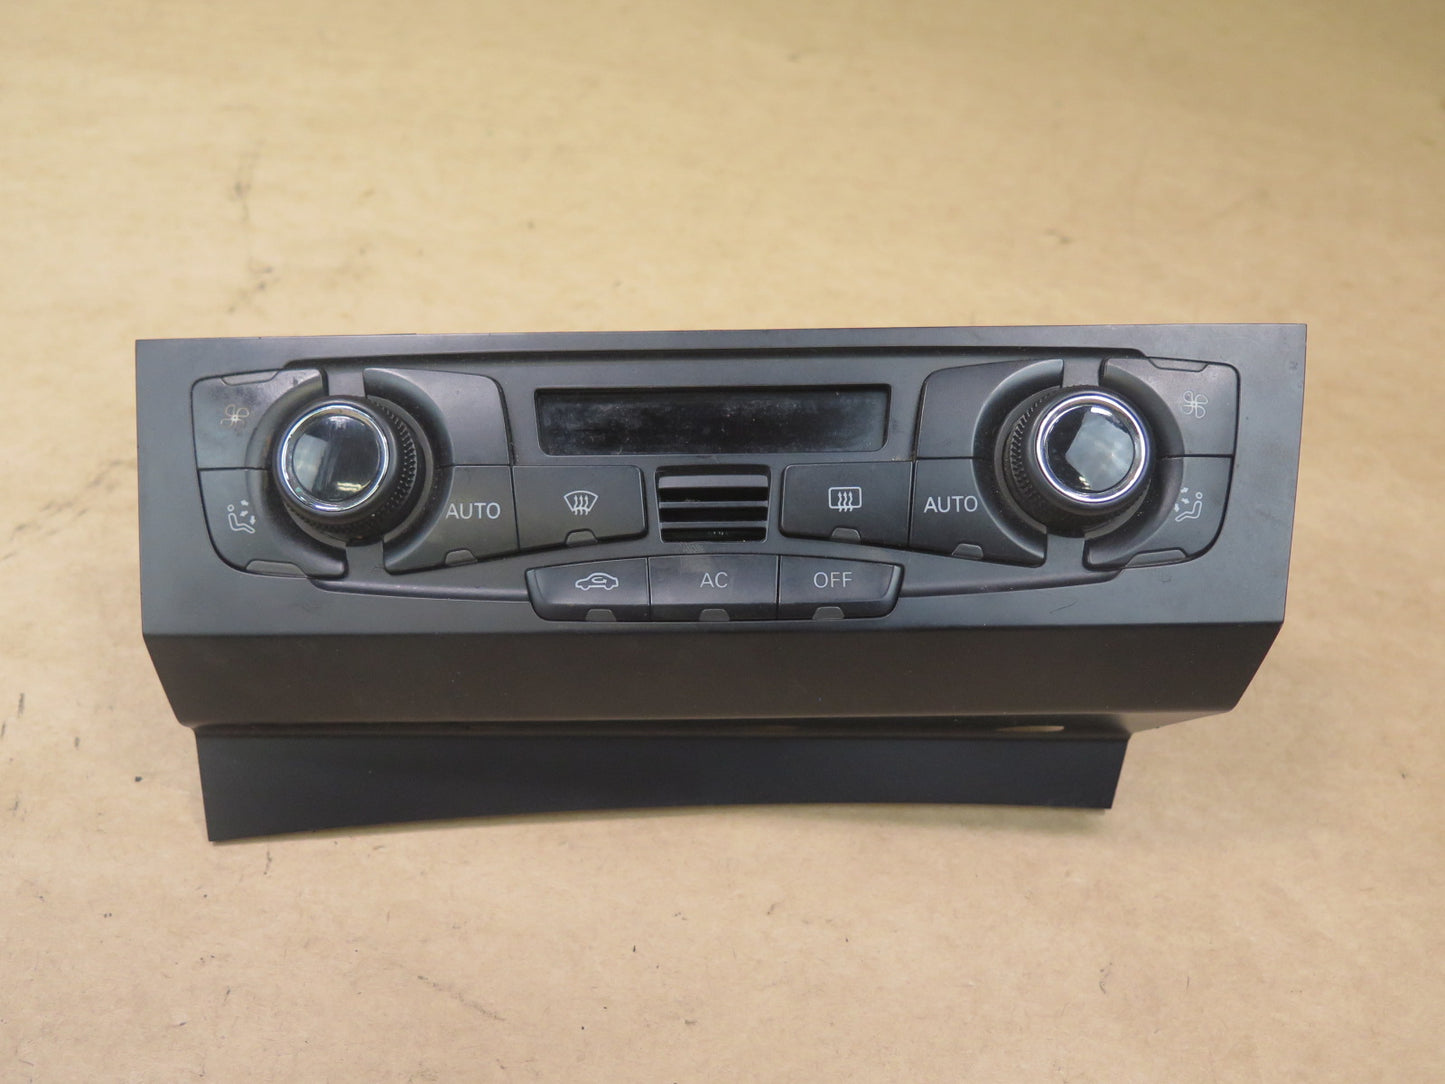 09-17 Audi 8R Q5 A5 A/C Heater Climate Control Switch Panel 8T1820043AB OEM